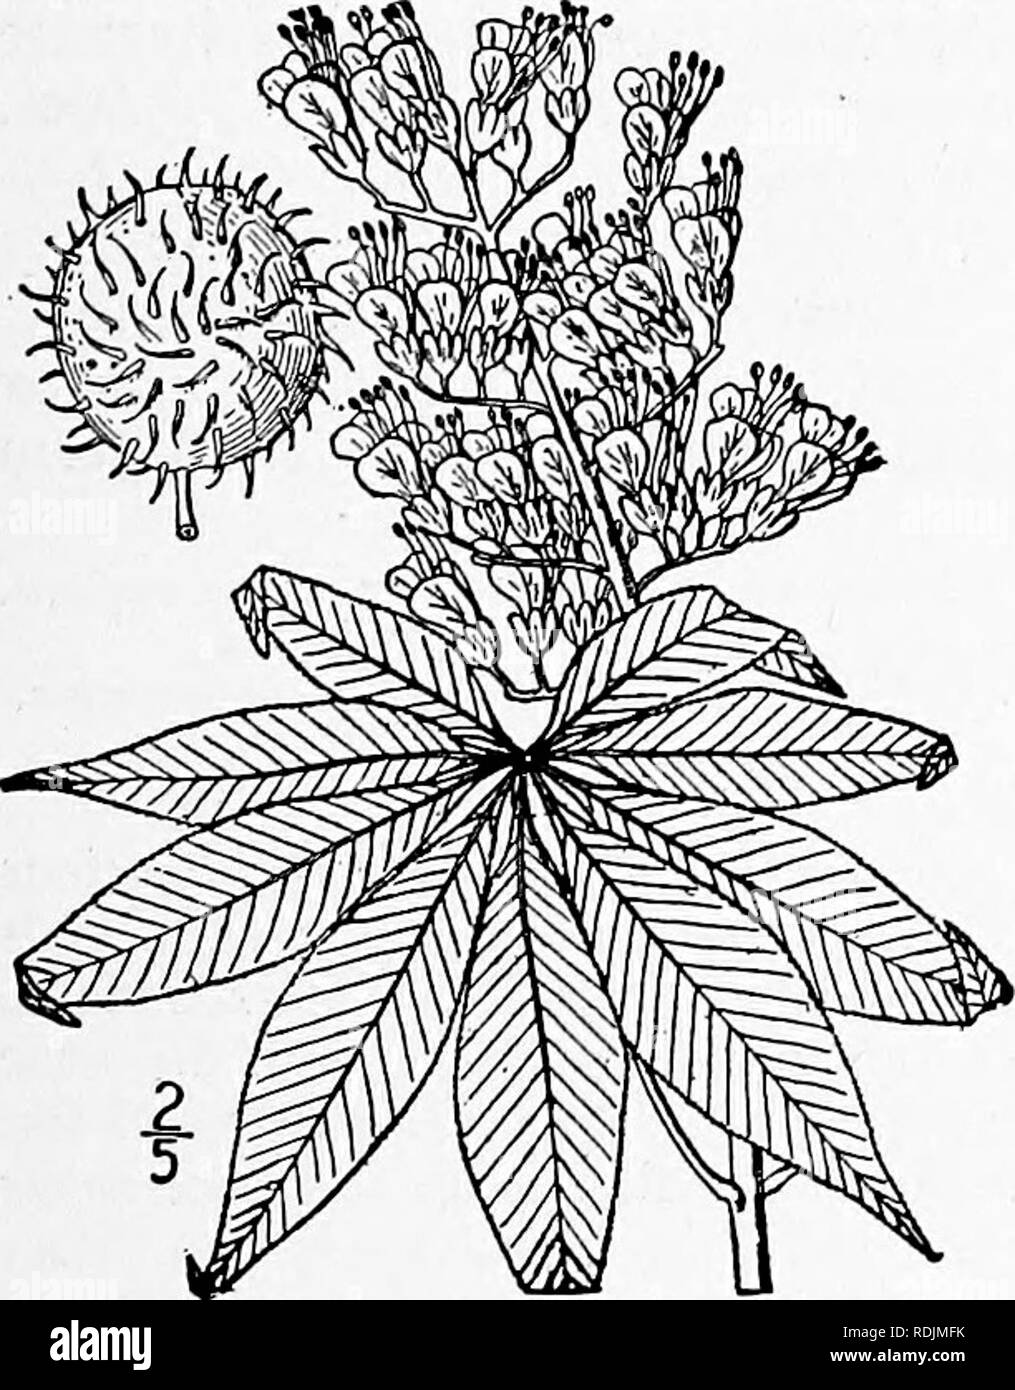 . An illustrated flora of the northern United States, Canada and the British possessions, from Newfoundland to the parallel of the southern boundary of Virginia, and from the Atlantic Ocean westward to the 102d meridian. Botany; Botany. Genus i. BUCKEYE FAMILY. 499 2. Aesculus glabra Willd. Fetid Buckeye Ohio Buckeye. Fig. 2816. Aesculus glabra Willd. Enum. 405. 1809. A tree, with maximum height of about 75° and trunk diameter of 2°, the bark rough and fetid. Leaves long-petioled; leaflets S, rarely 7, 3-6' long, oval, oblong or lanceolate, acuminate, narrowed at the base, glabrous or slightly Stock Photo